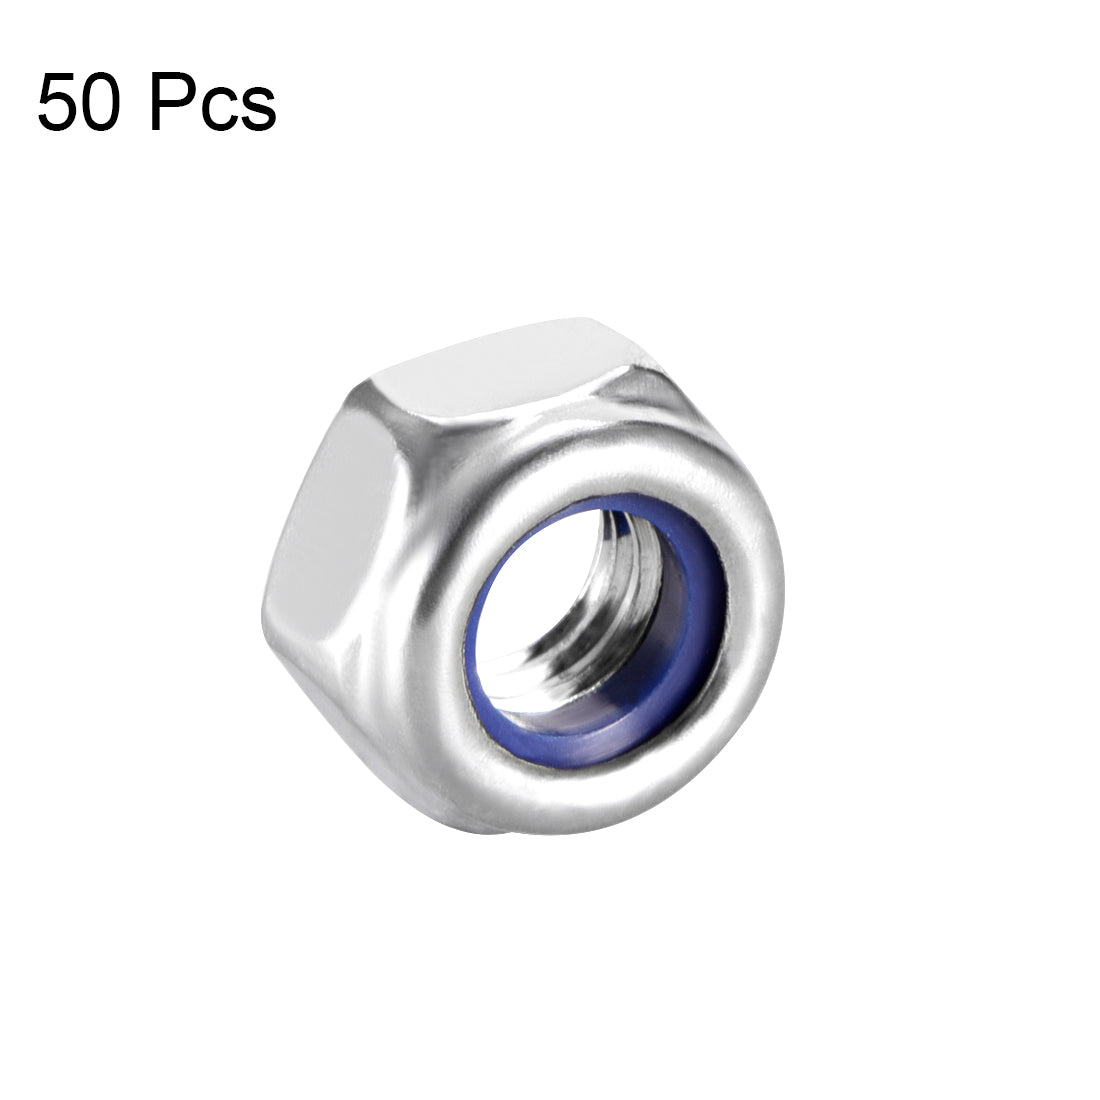 uxcell Uxcell M6 x 1mm Nylon Insert Hex Lock Nuts, 304 Stainless Steel, Plain Finish, 50 Pcs